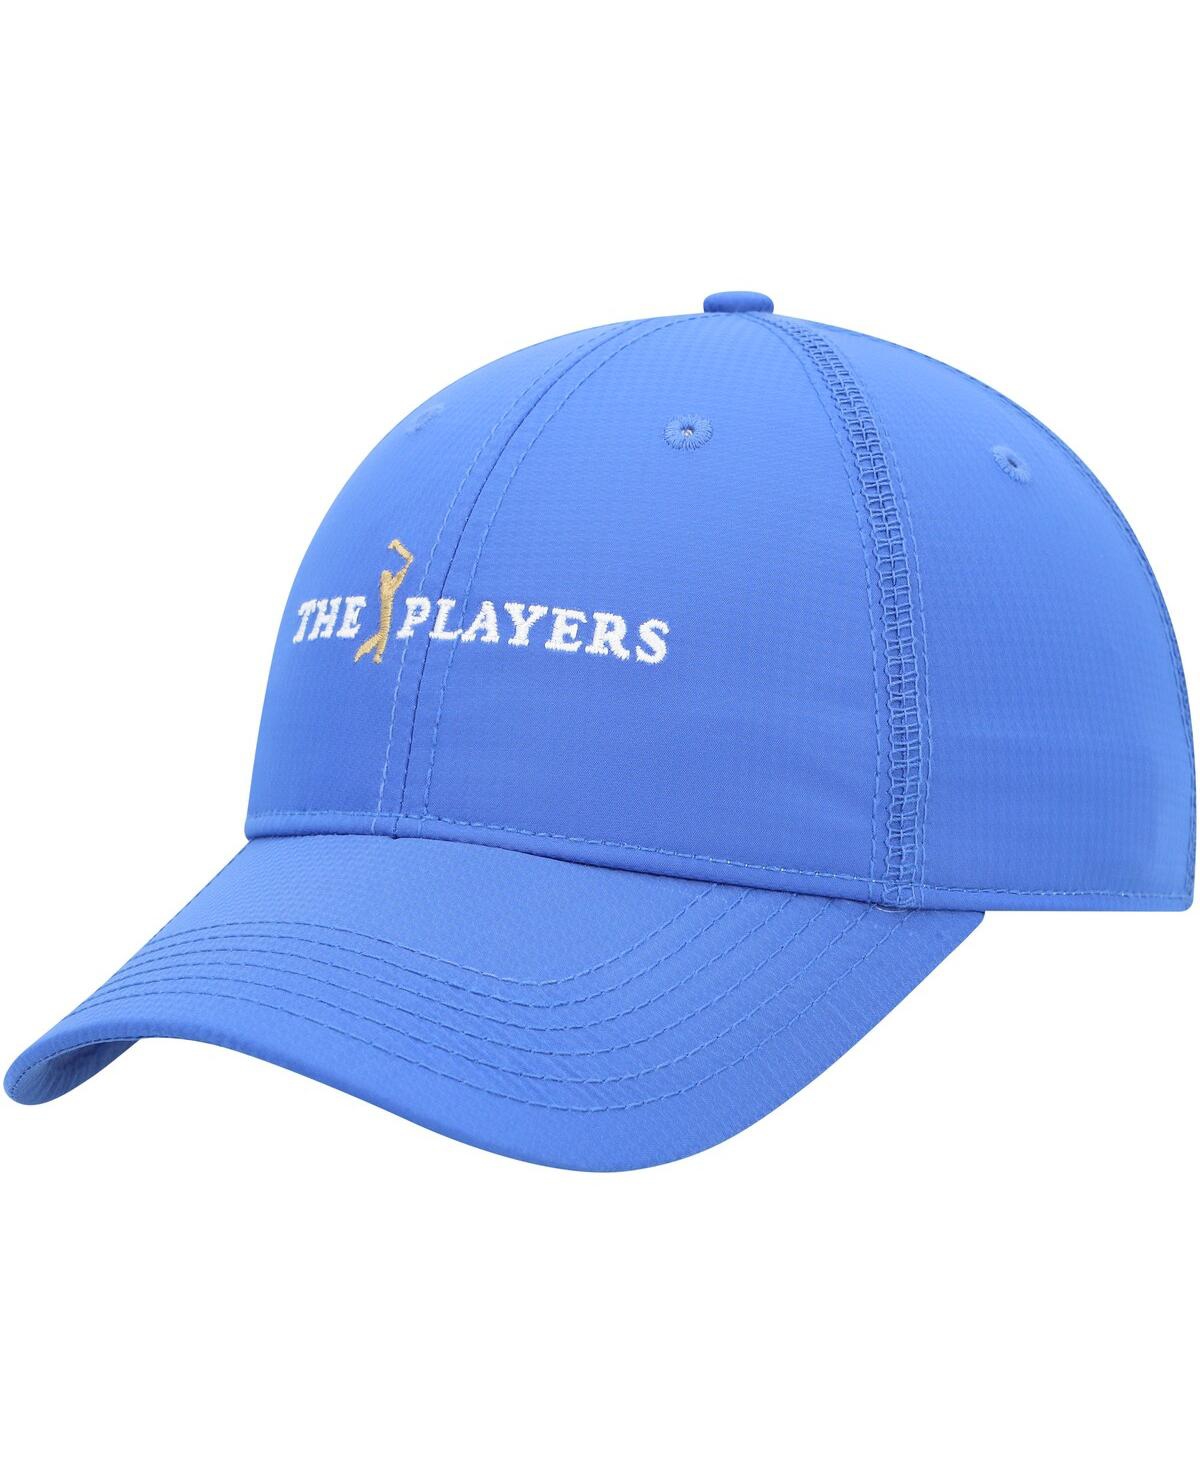 Shop Ahead Women's  Royal The Players Marion Adjustable Hat